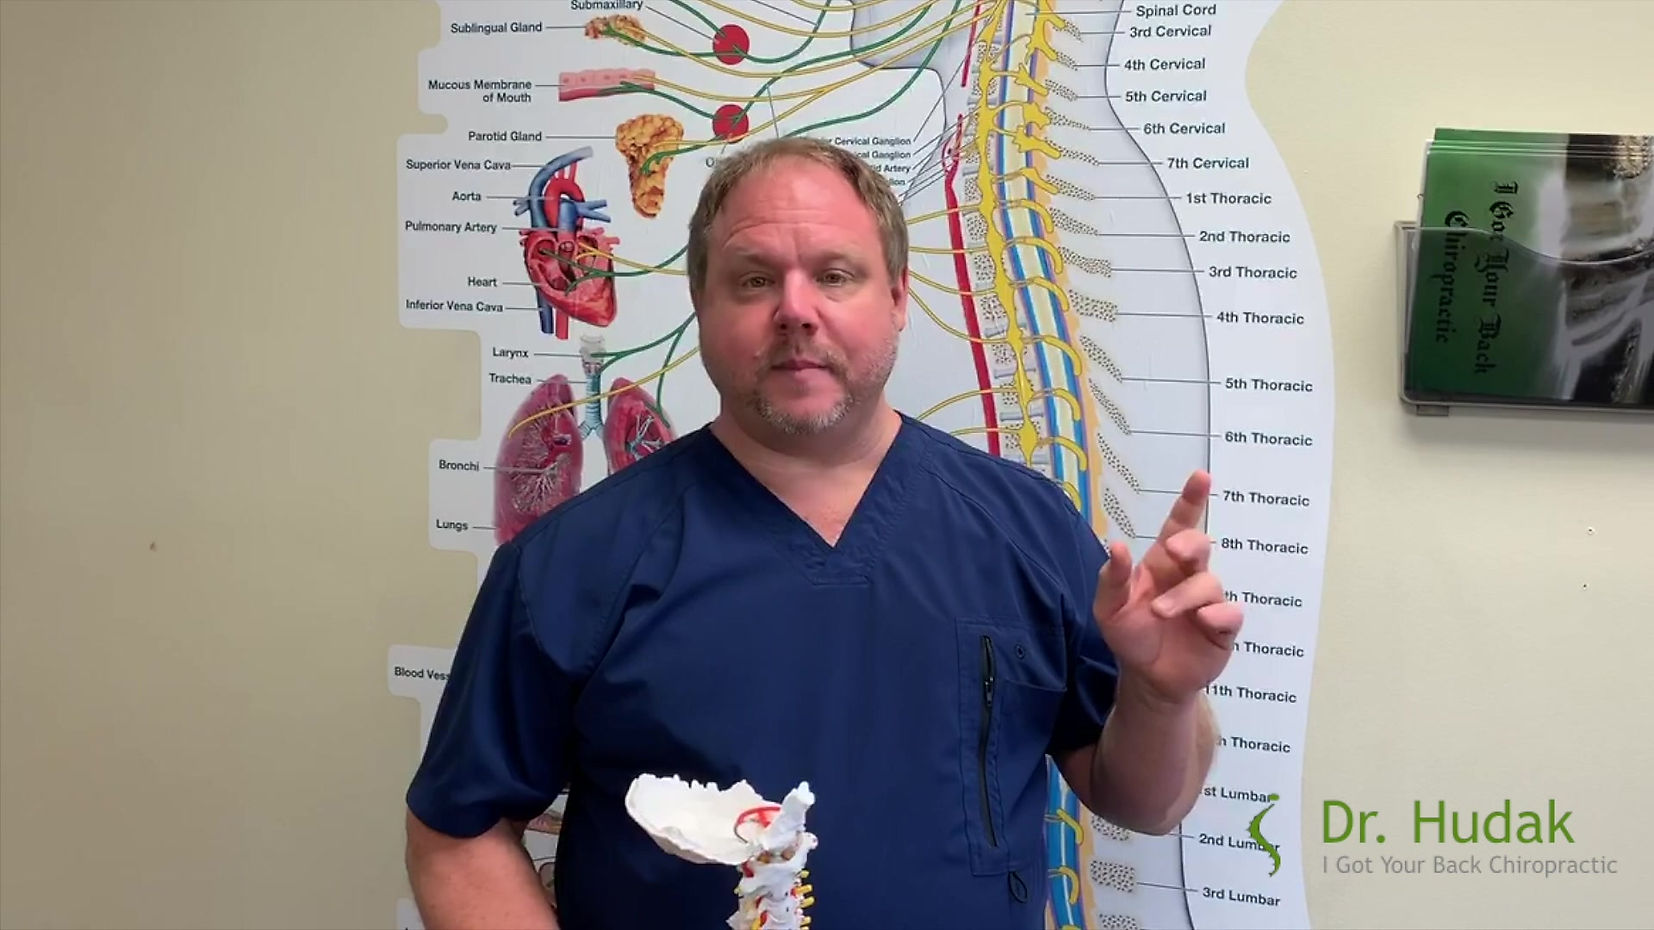 Headaches Explainer Video with Dr. Hudak